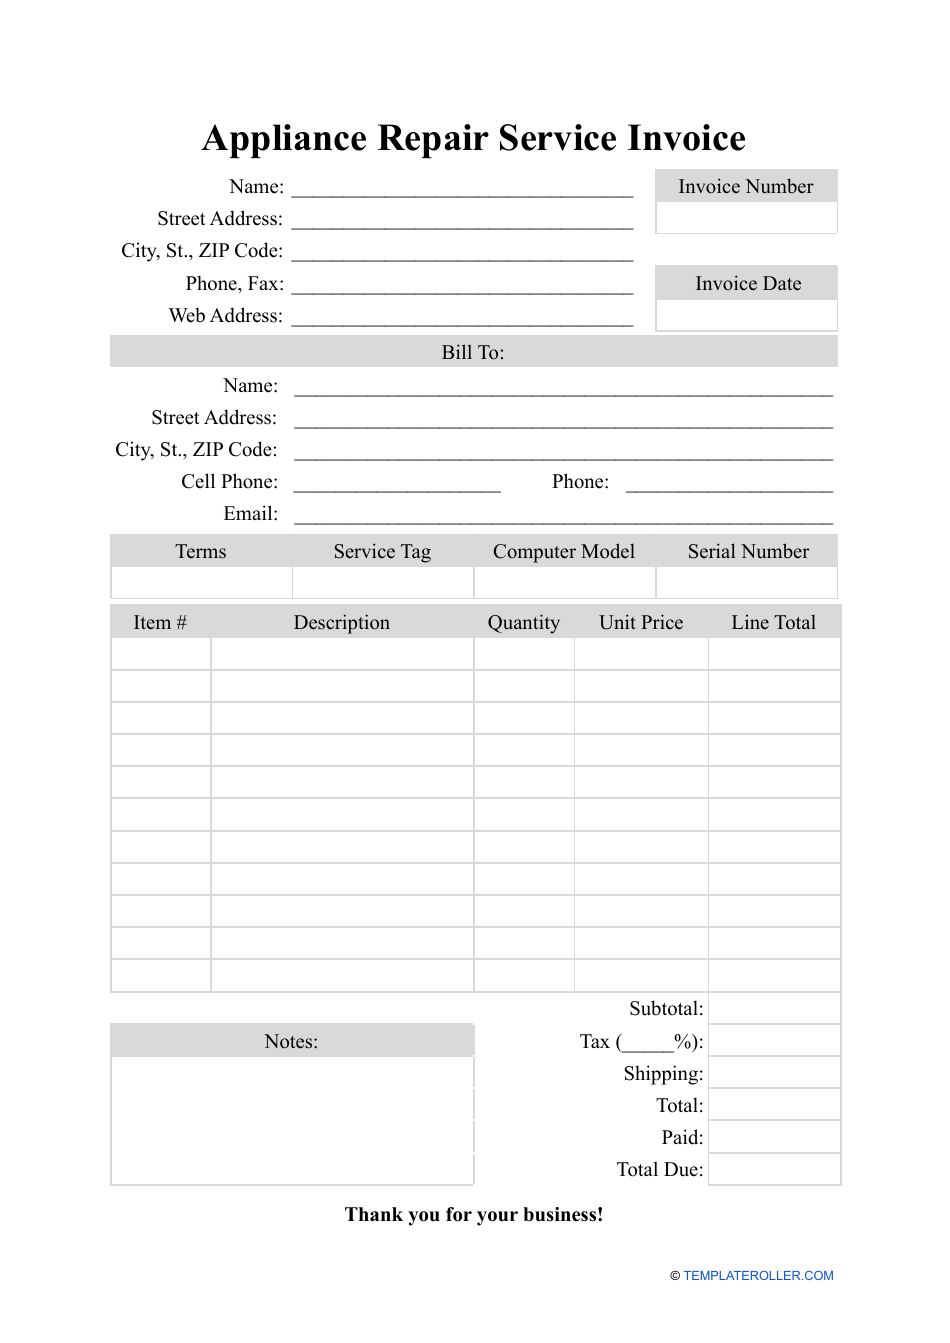 appliance-repair-service-invoice-template-fill-out-sign-online-and-download-pdf-templateroller